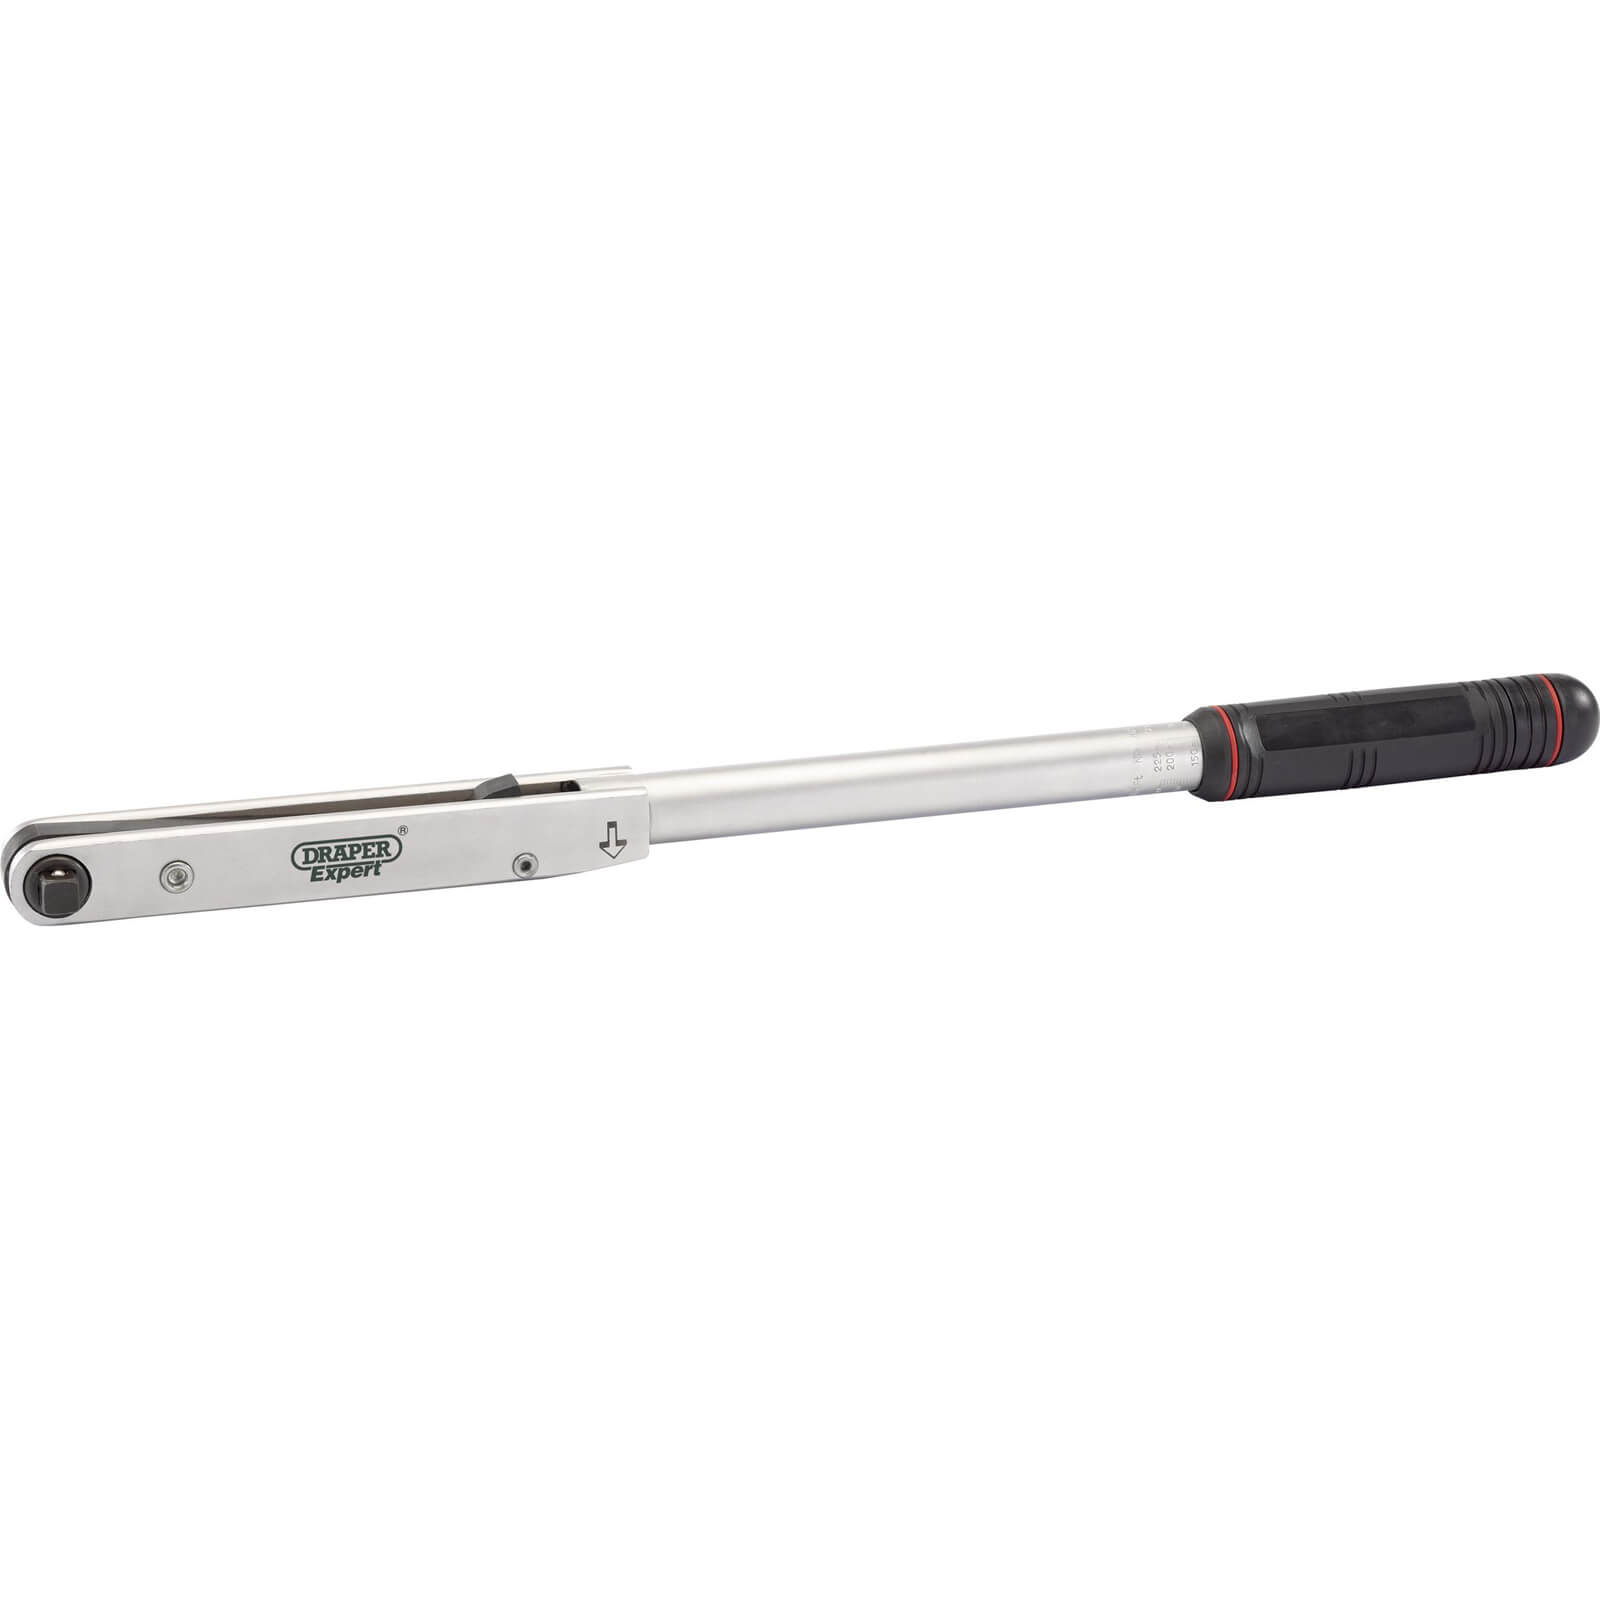 Image of Draper PTW 1/2" Square Drive Push Through Torque Wrench 1/2" 50Nm - 225Nm